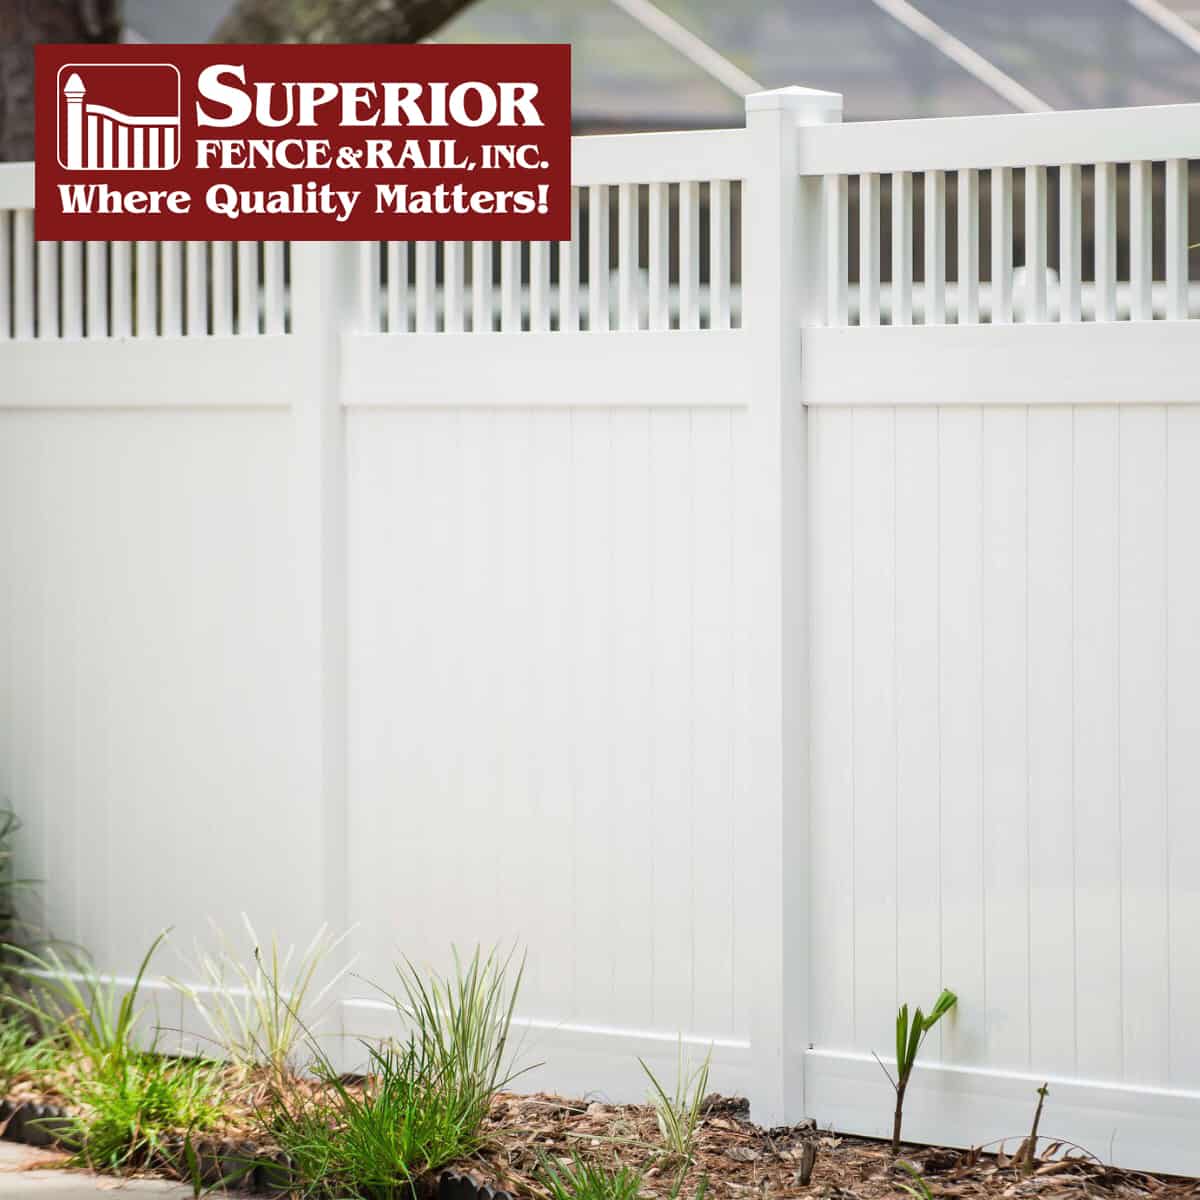 https://www.superiorfenceandrail.com/wp-content/uploads/2022/06/Westland-Fence-Company-Contractor.jpg